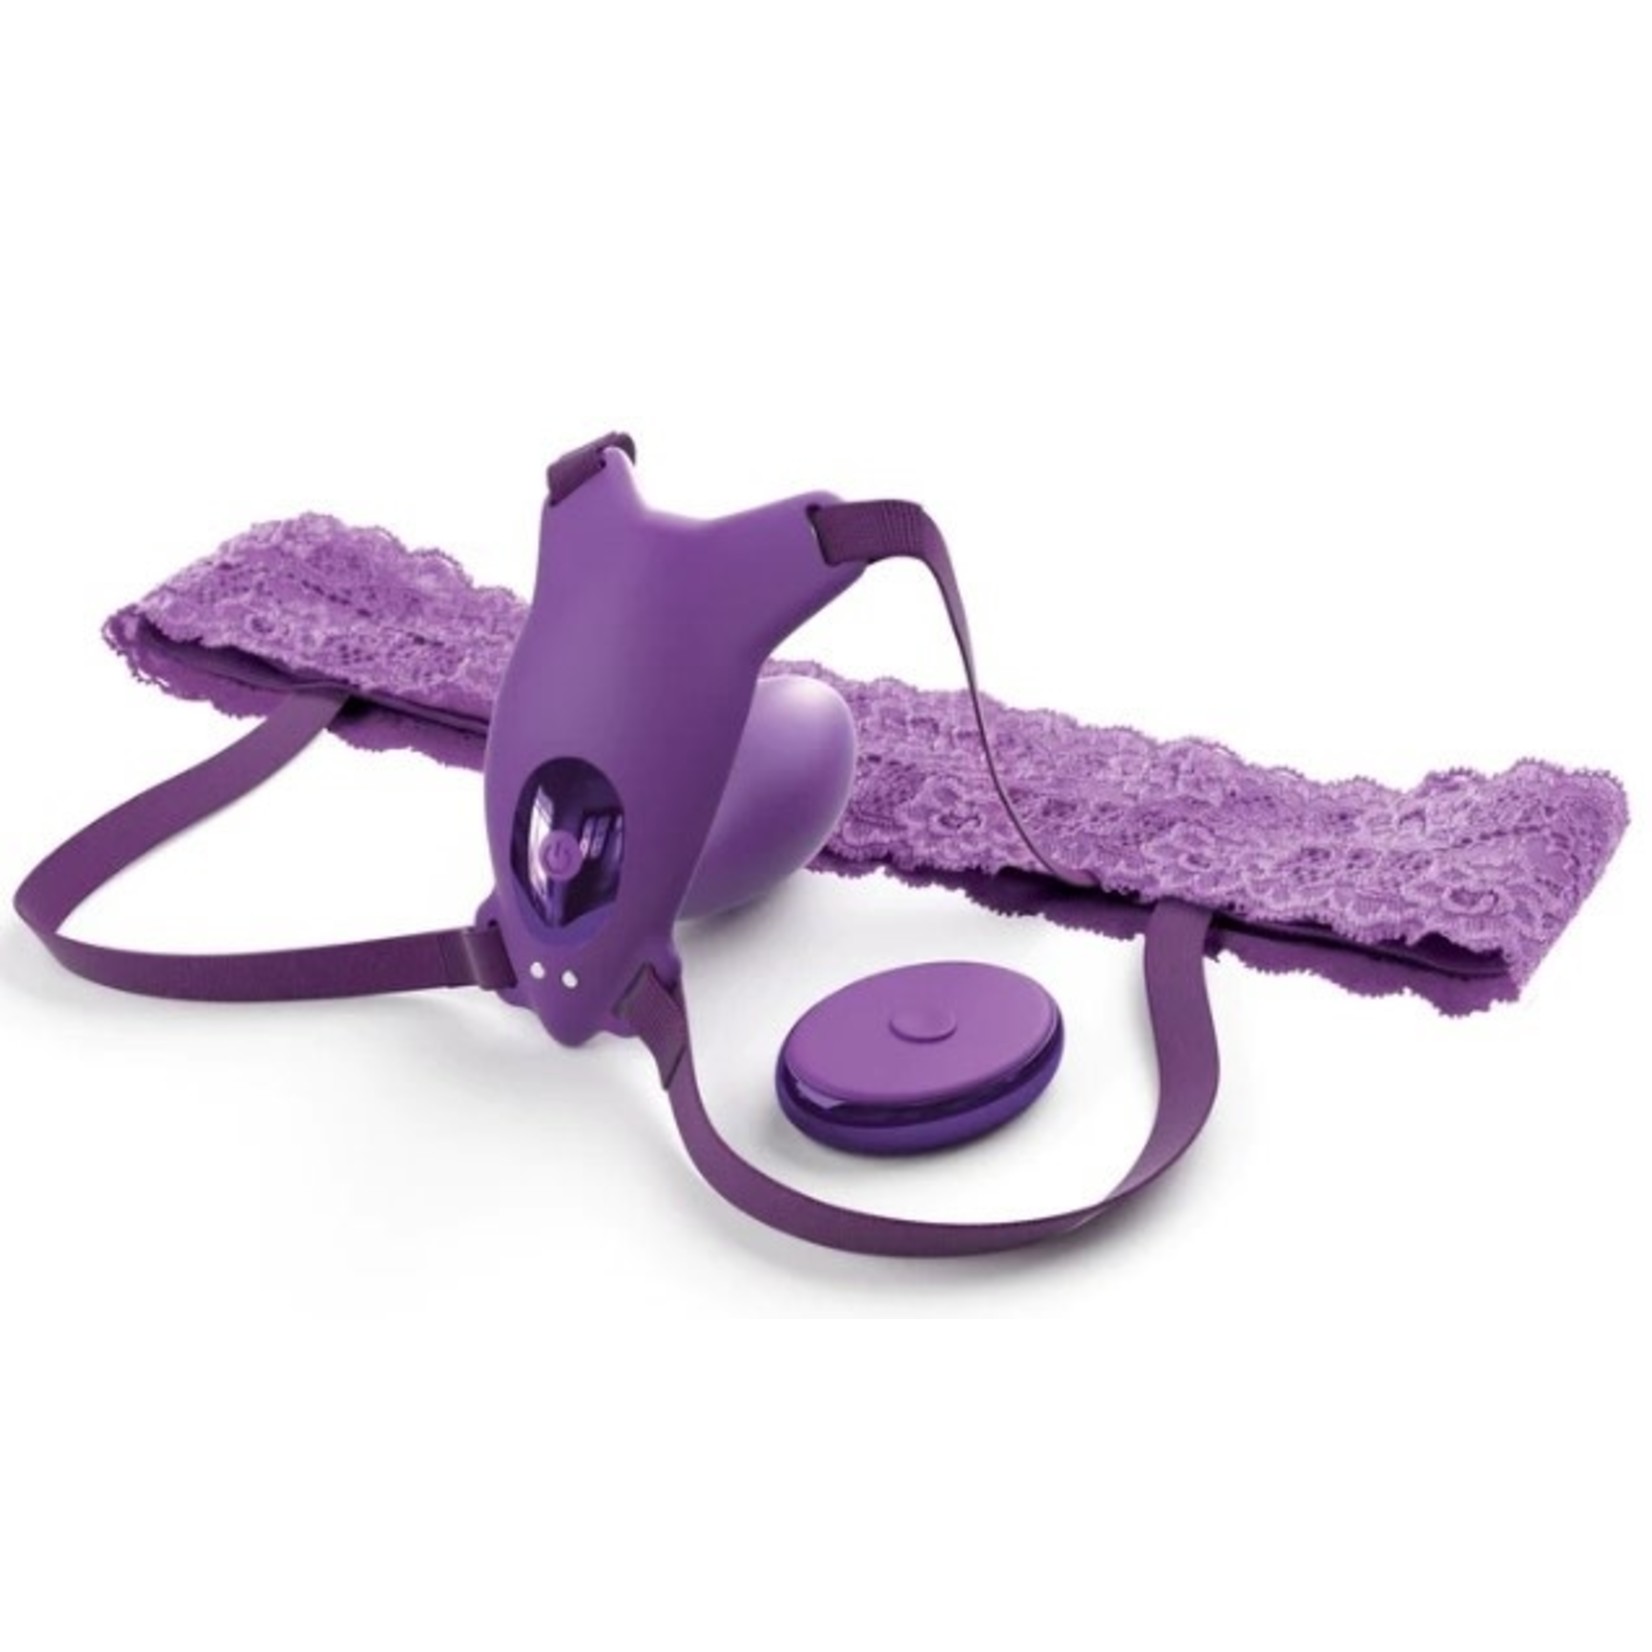 FANTASY FOR HER FANTASY FOR HER - ULTIMATE G-SPOT BUTTERFLY STRAP-ON